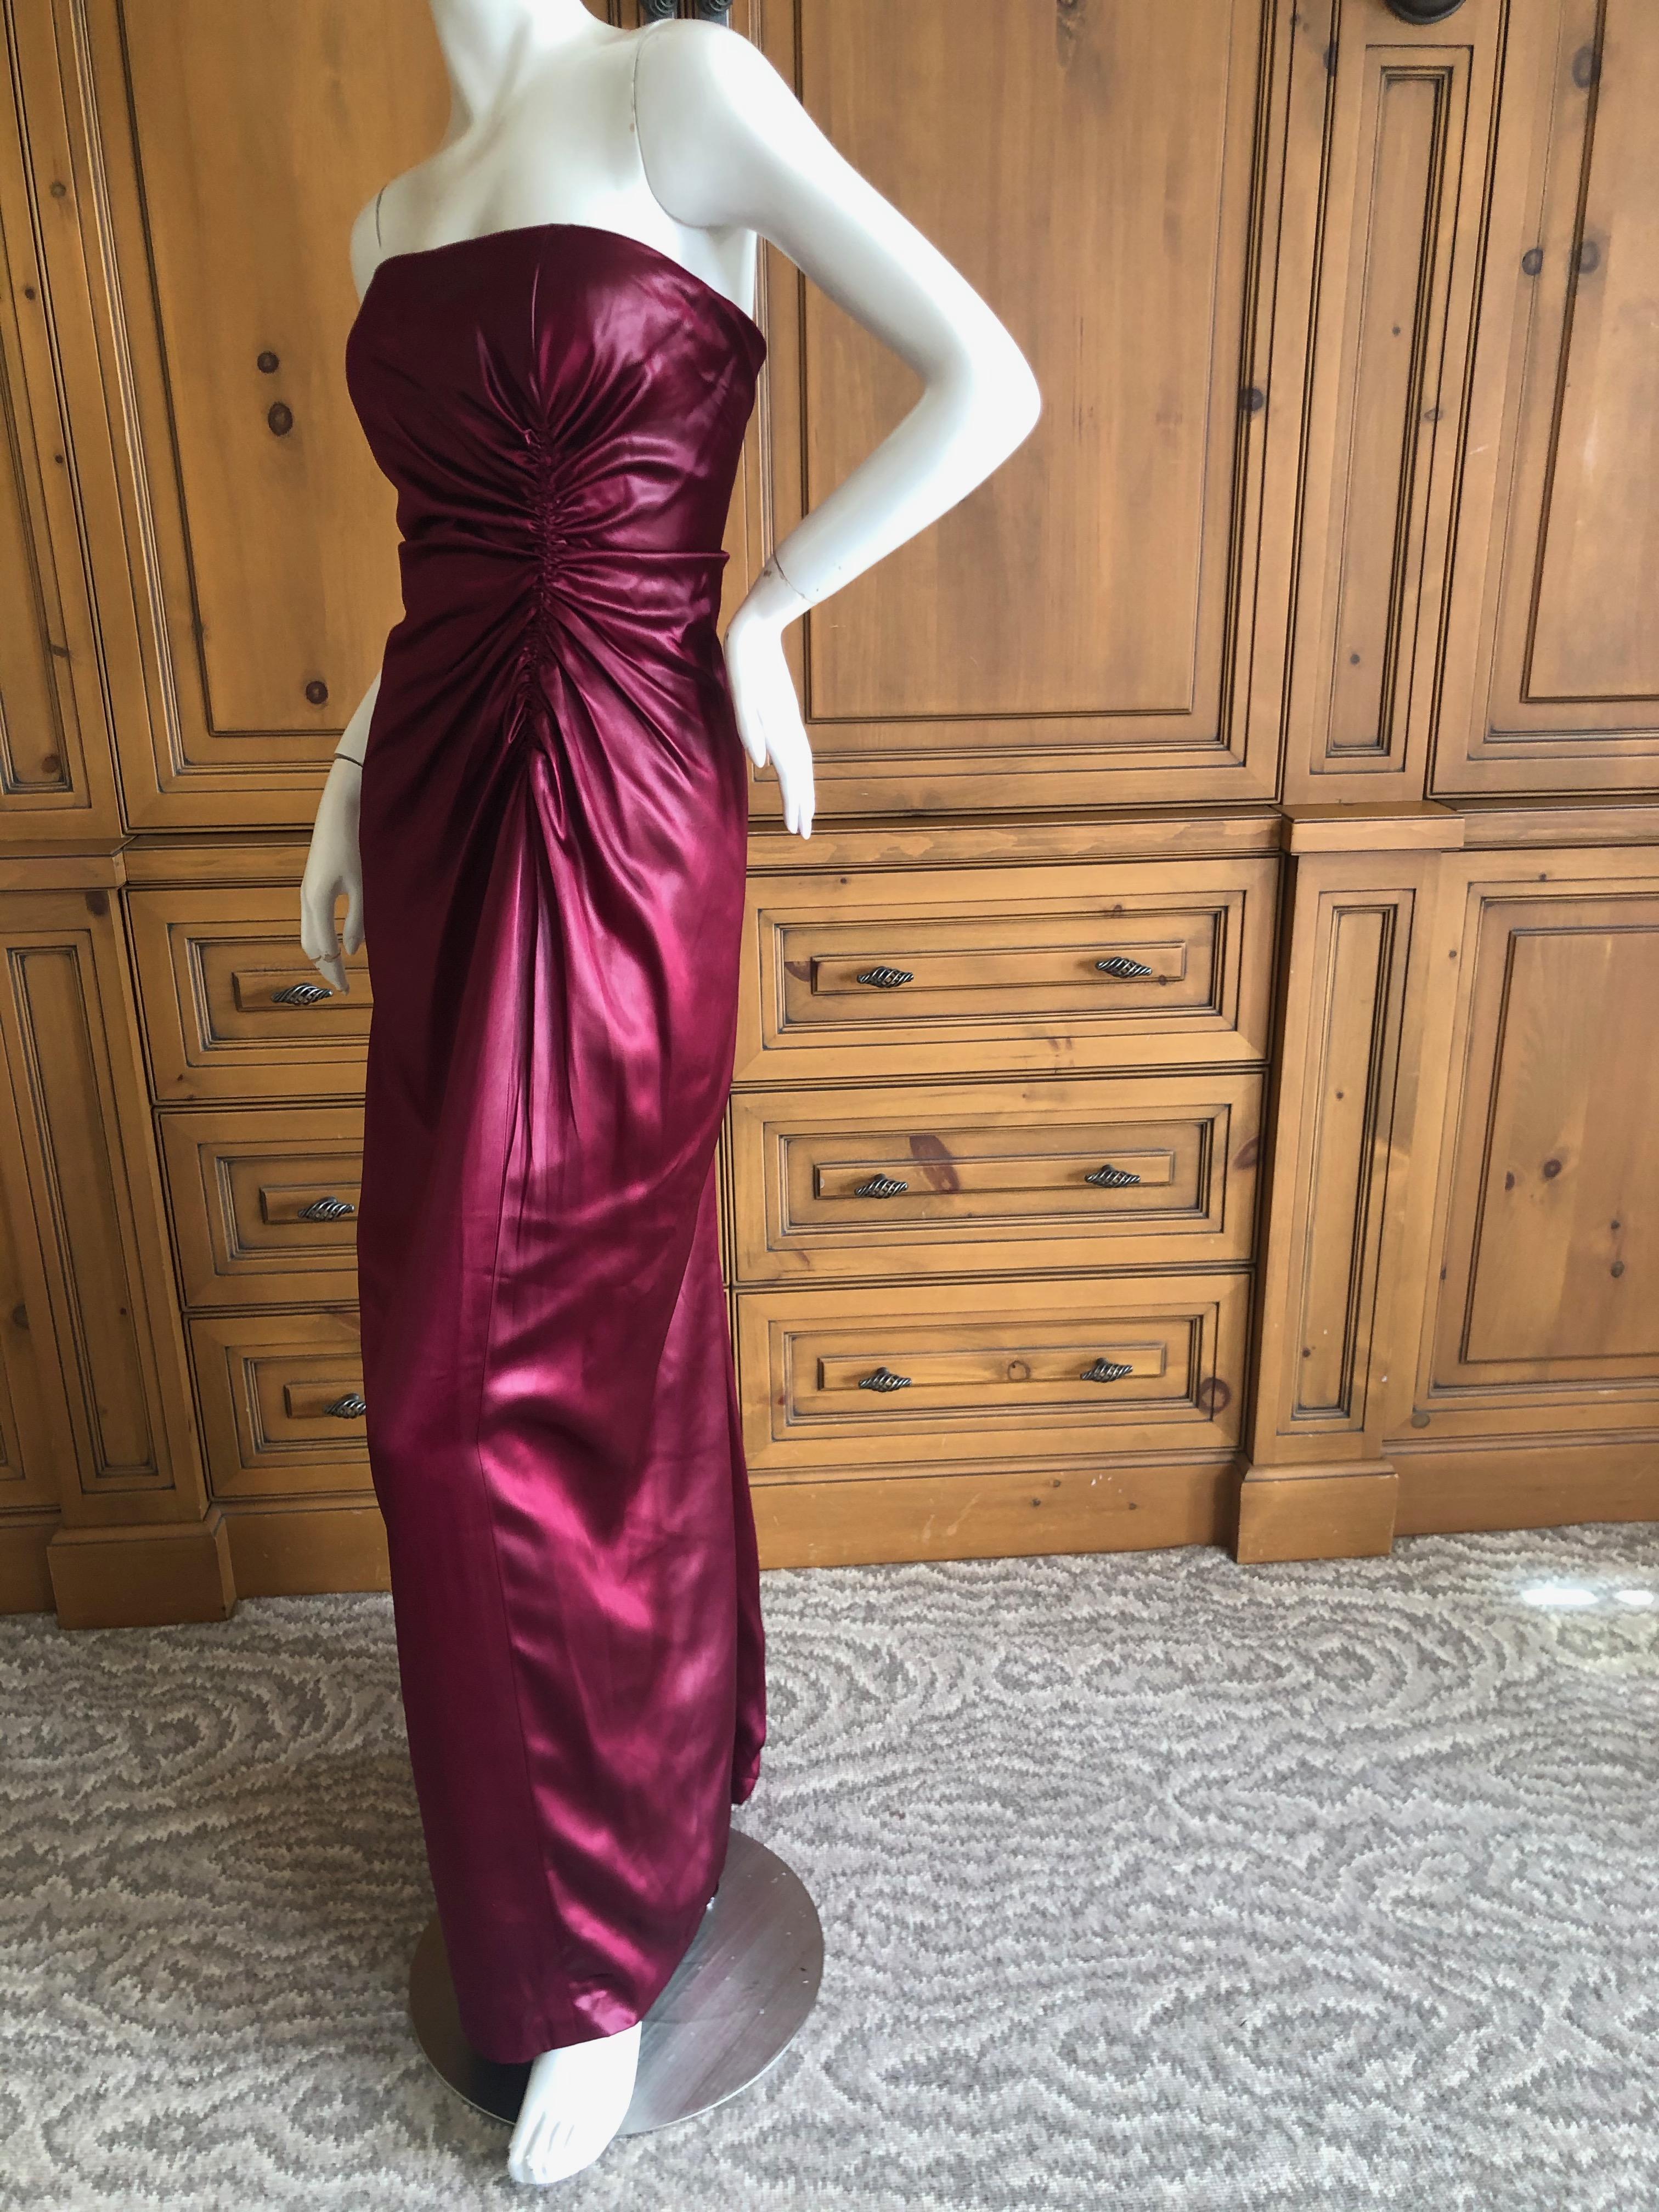 Oscar de la Renta Vintage 1980's Strapless Evening Dress with Built in Corset
Such a beautiful color, the finish has a metallic sheen.
Size 4 but runs small
 Bust 32